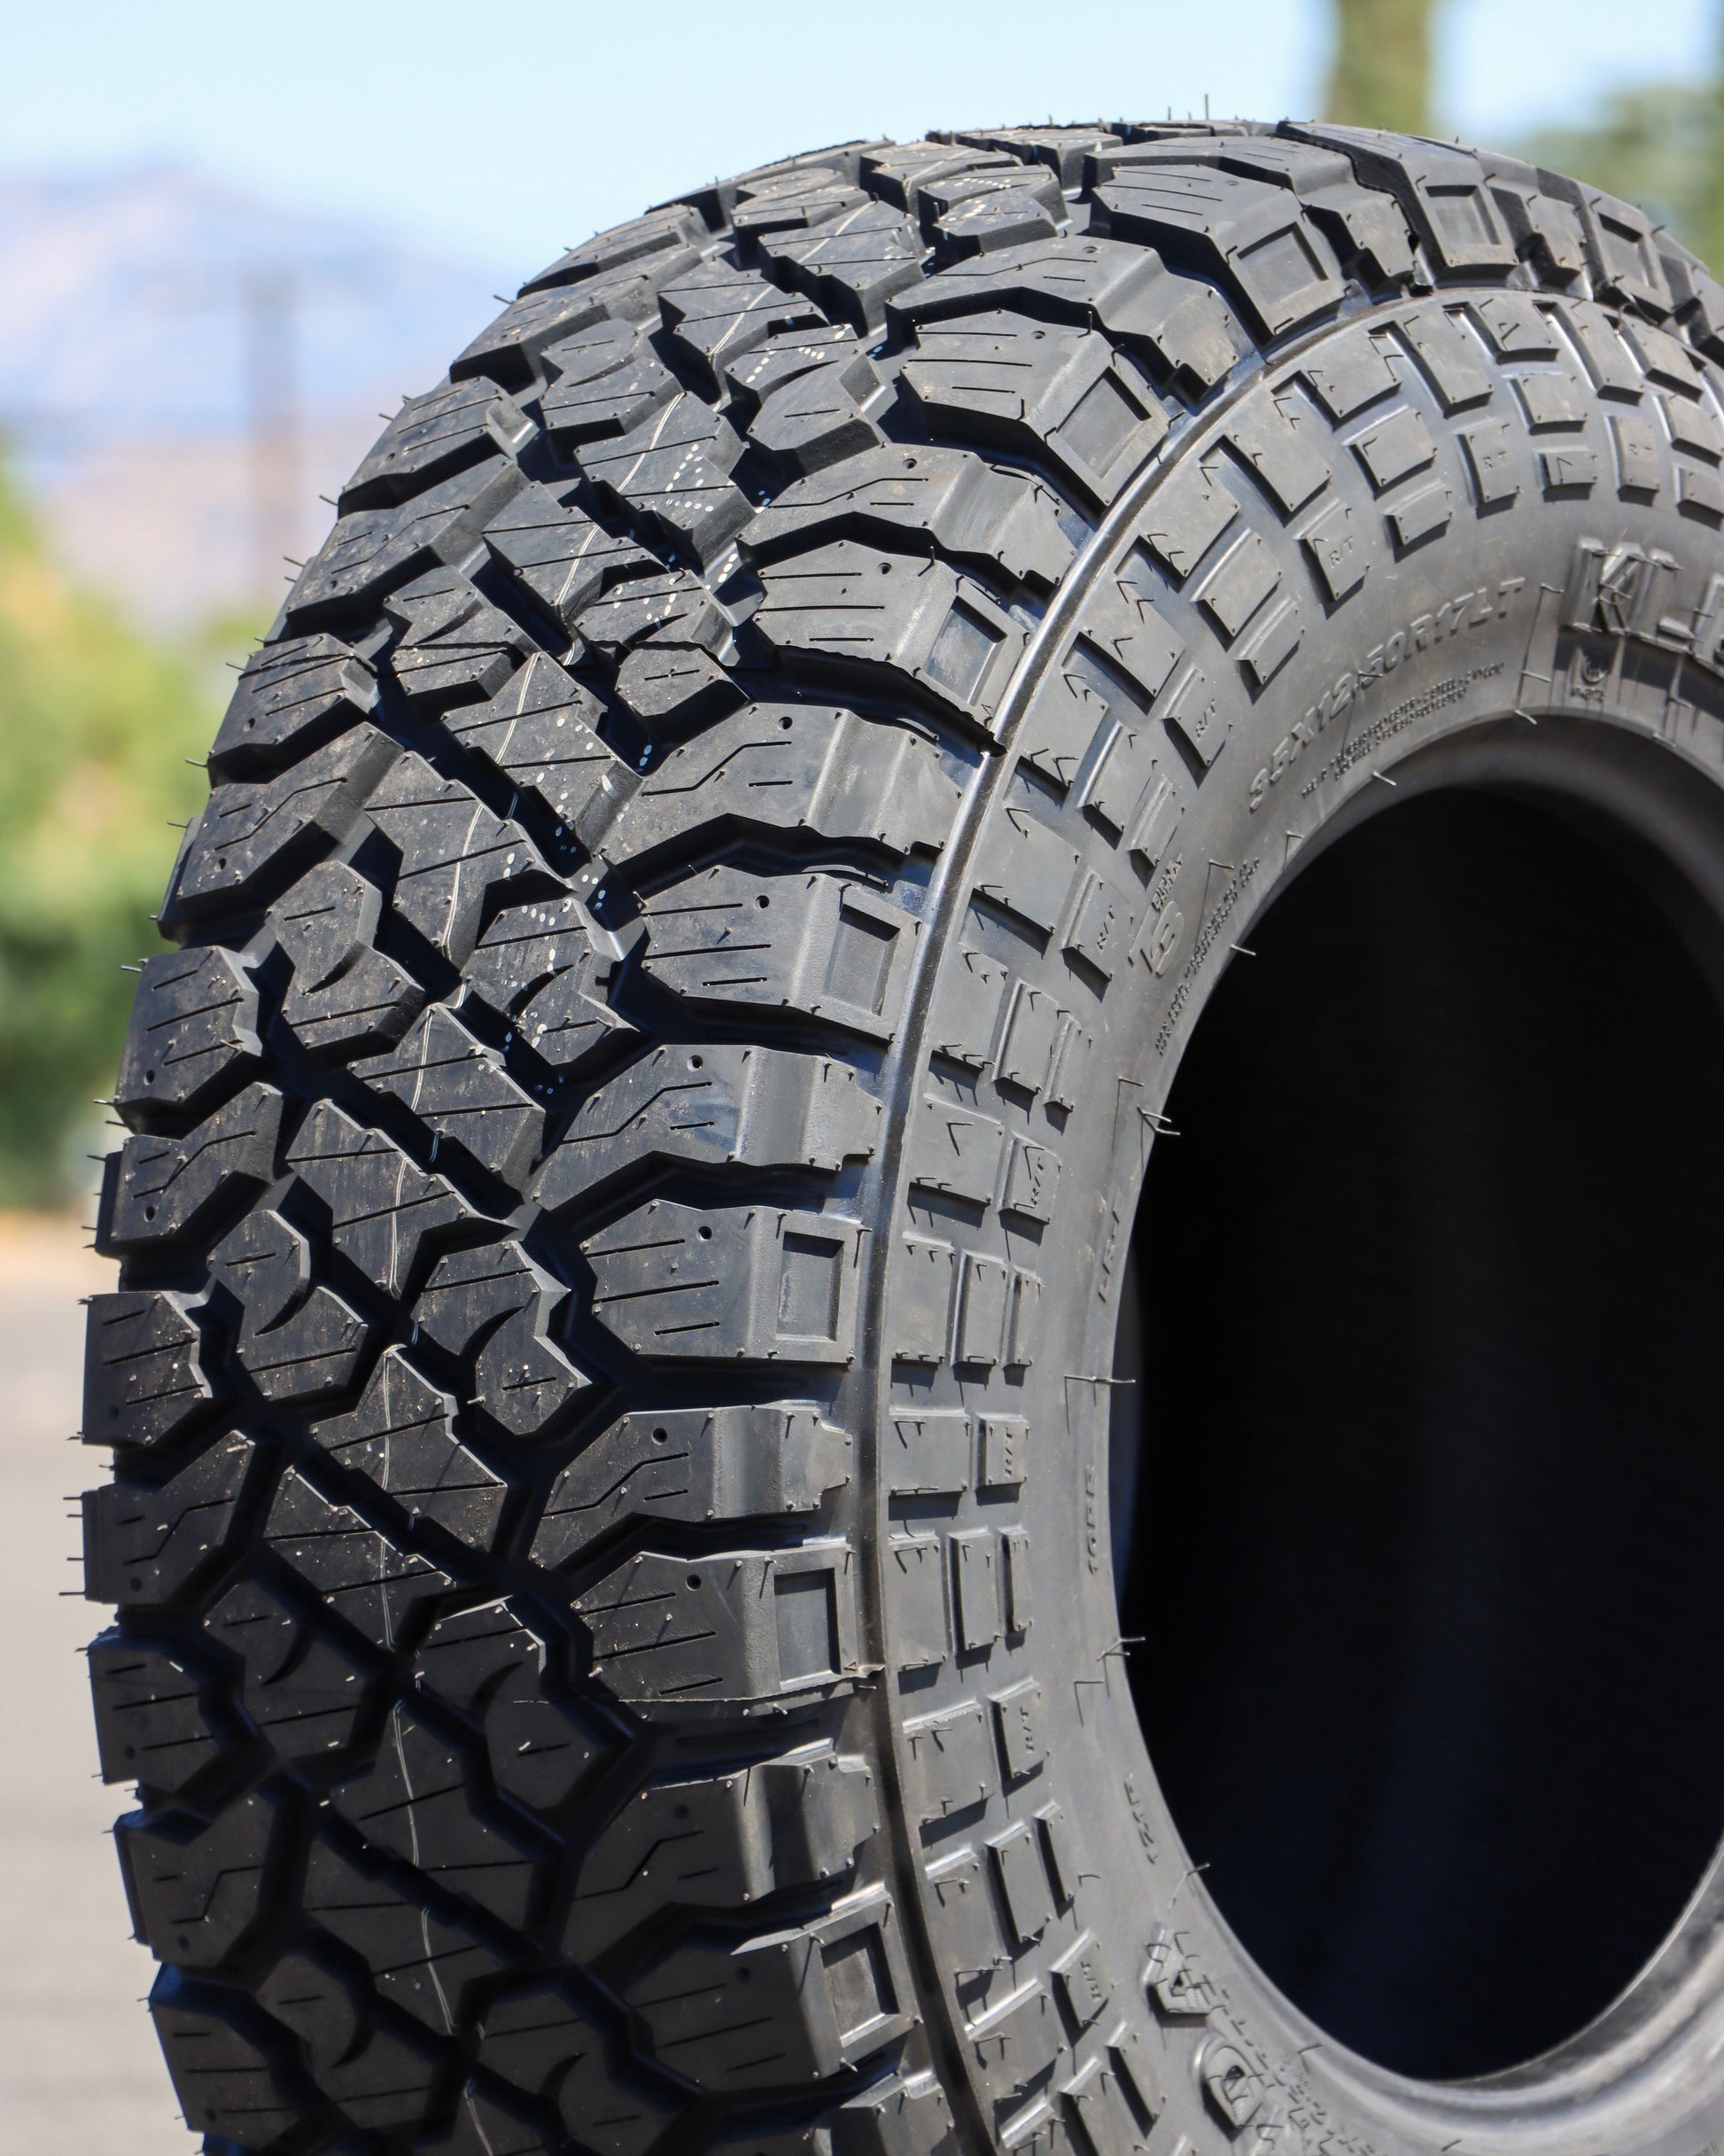 CLose-up of the tread and sidewall of the Kenda Klever R/T tire.